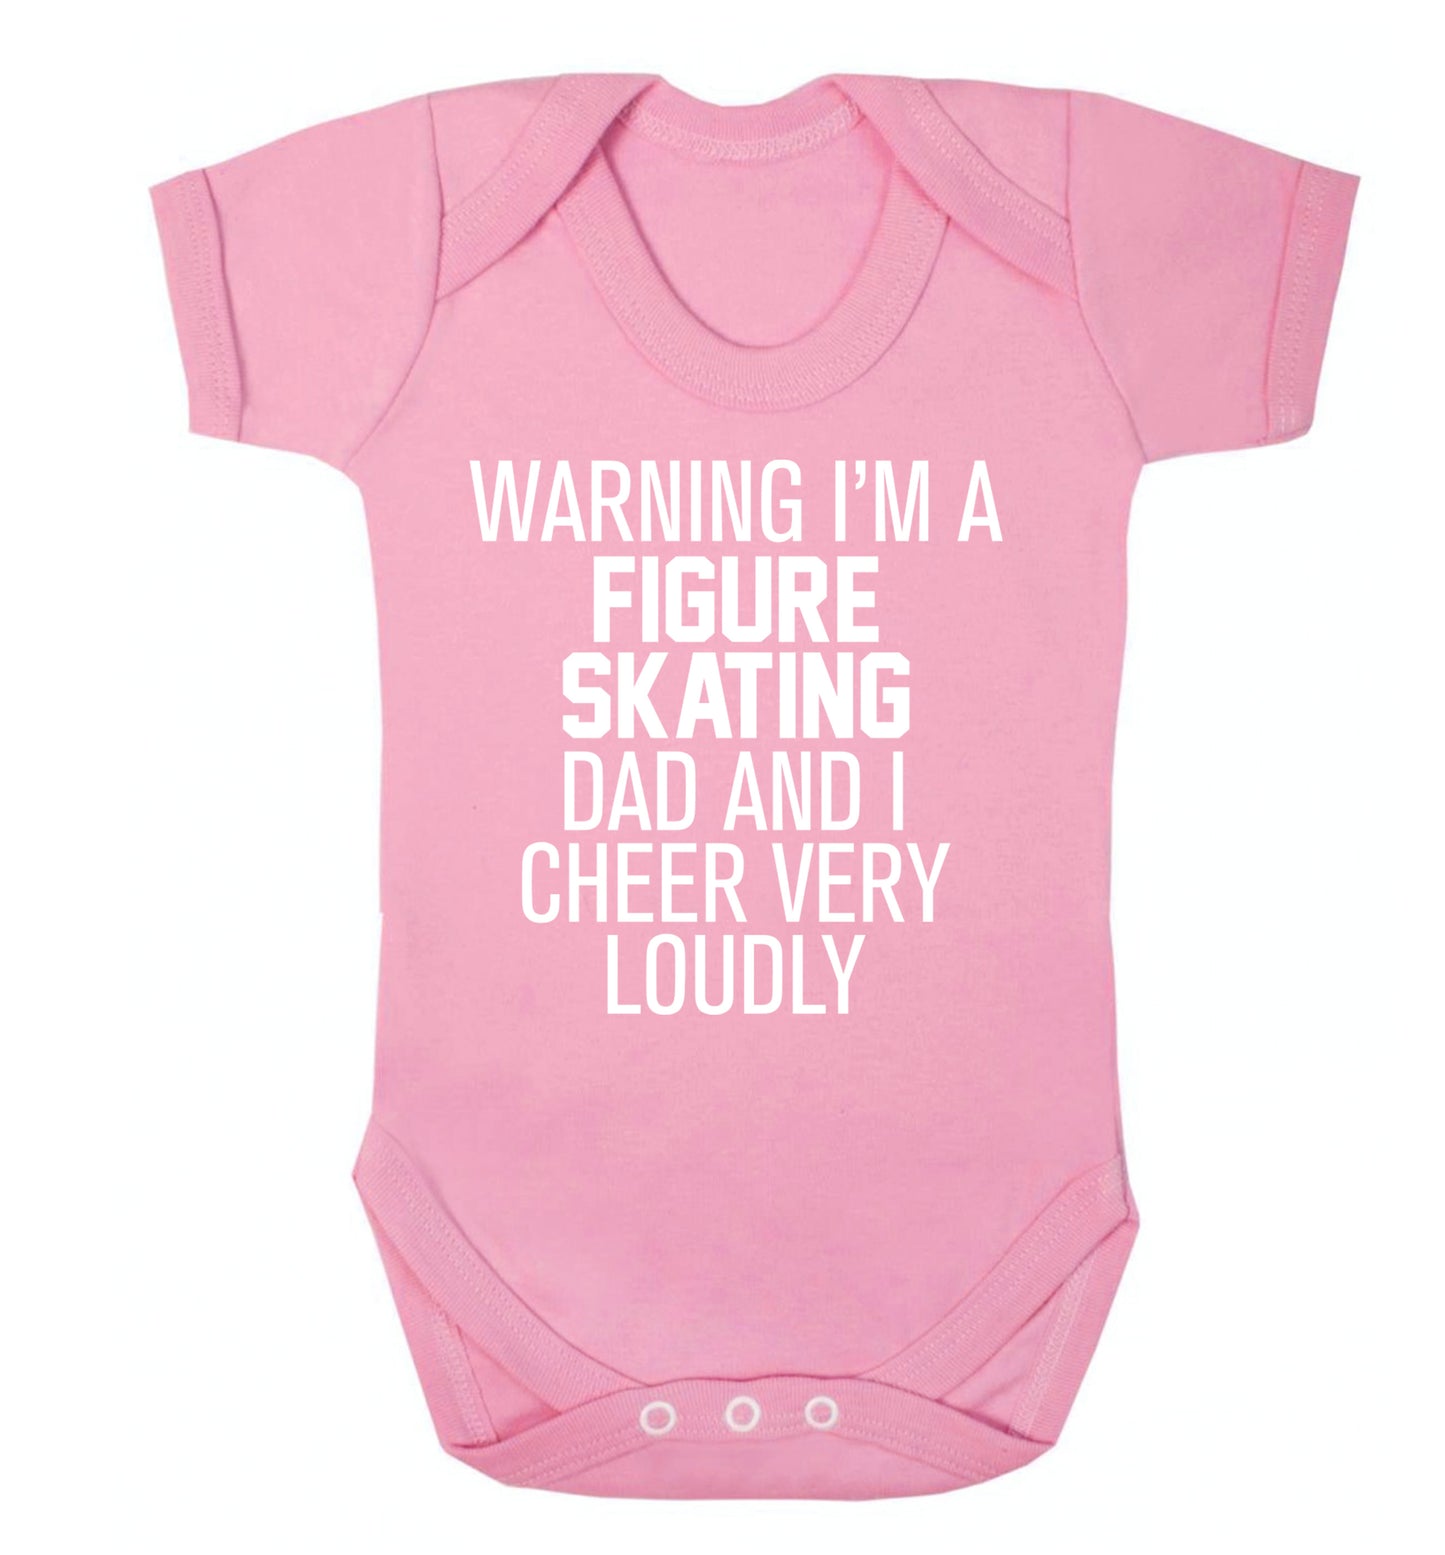 Warning I'm a figure skating dad and I cheer very loudly Baby Vest pale pink 18-24 months